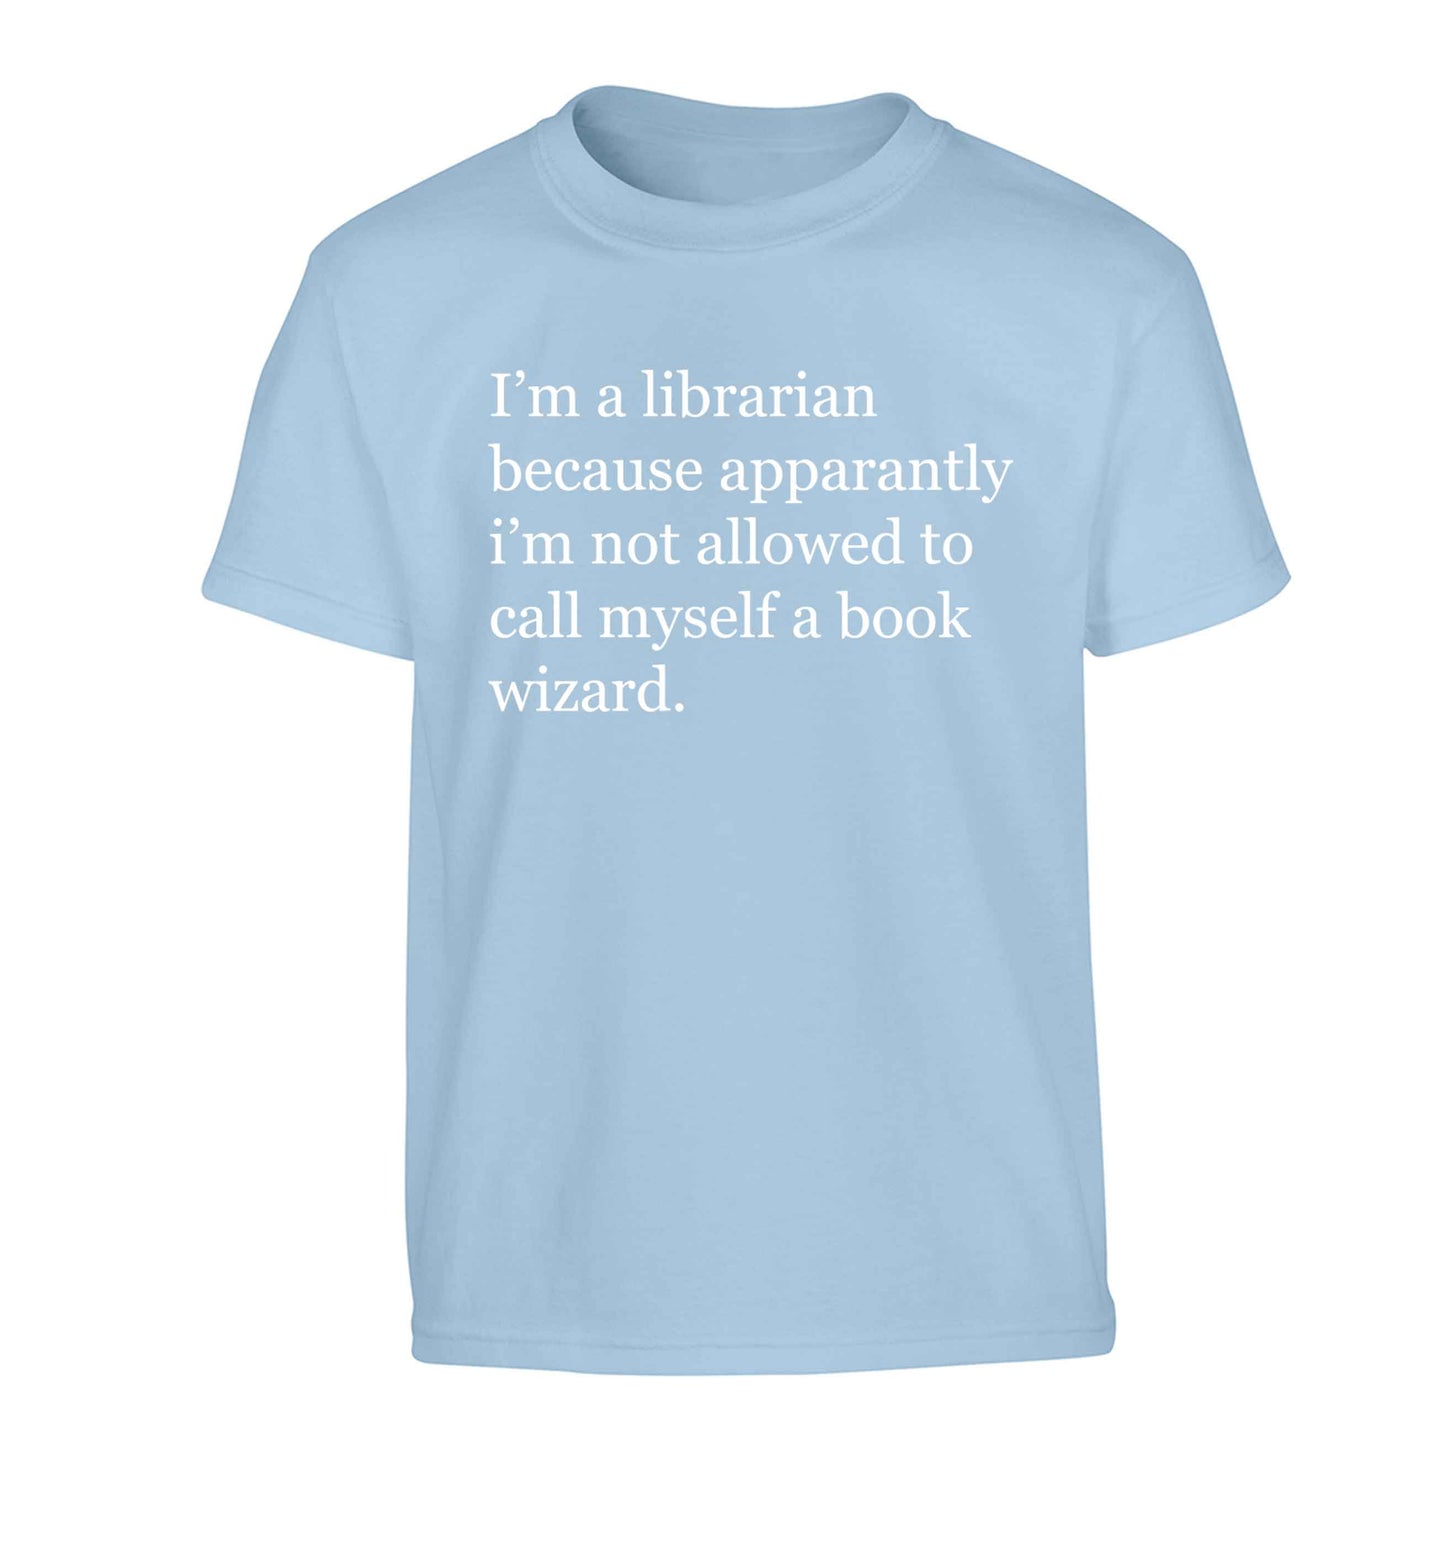 iÕm a librarian because apparantly iÕm not allowed to call myself a book wizard Children's light blue Tshirt 12-13 Years